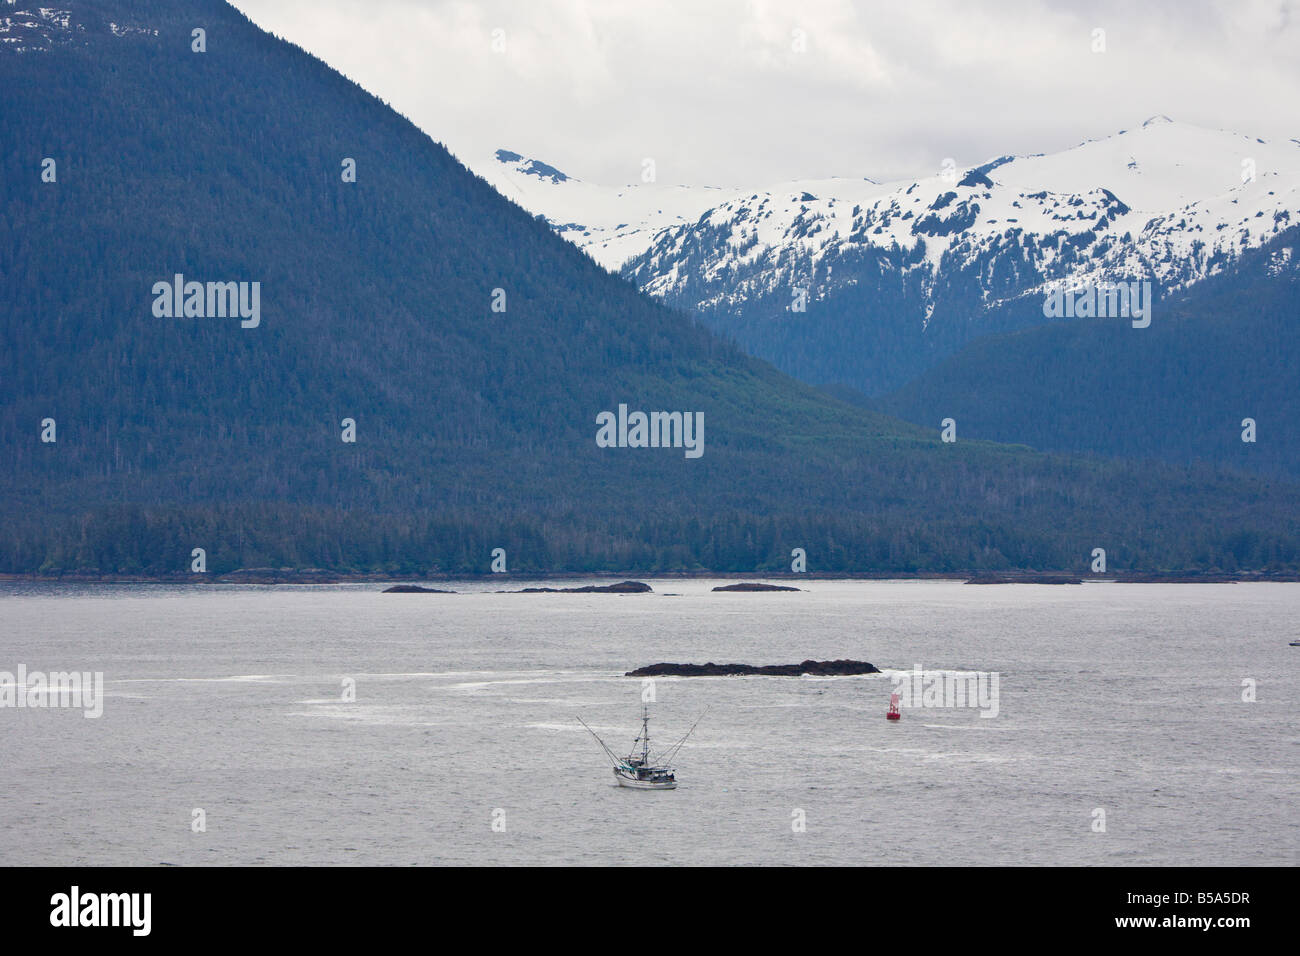 Commercial fishing boat trawling the waters of Inside Passage between Seattle and Alaska in front of snow capped mountains Stock Photo